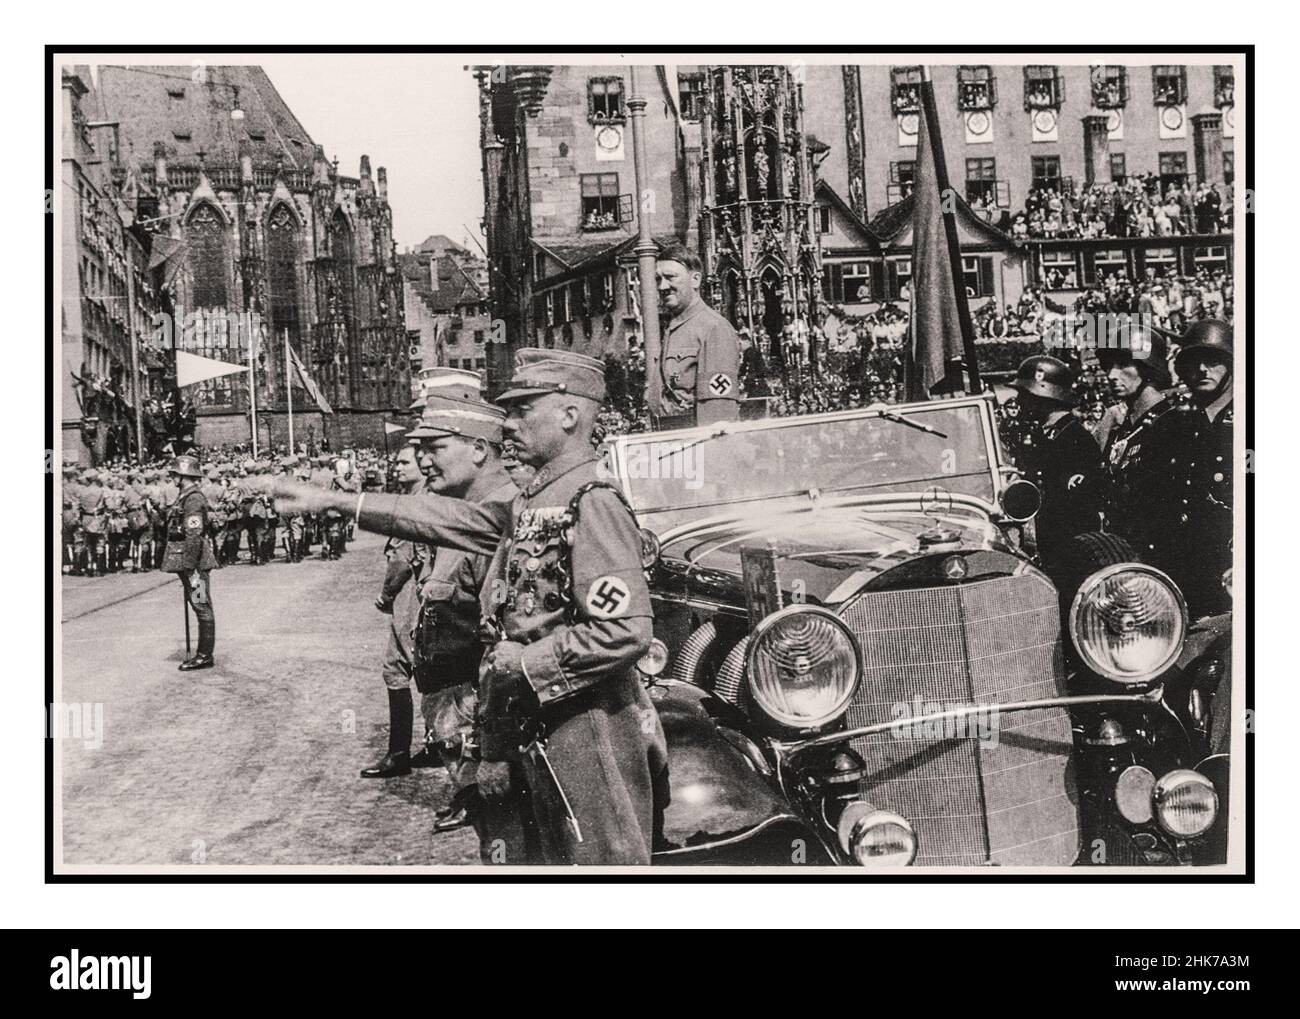 Adolf Hitler standing in his open top Mercedes car at Nuremberg Rally 1935, Germany - SA Sturmabteilung political militia troops of the Nazi party, march past Adolf Hitler during a parade in the city. 1930’s Adolf Hitler wearing swastika armband in military parade, standing in Mercedes open car with Heil Hitler salute to passing marching Sturmabteilung troops Hermann Goring in foreground Nuremberg Germany Goring and Hess are seen in the foreground Stock Photo